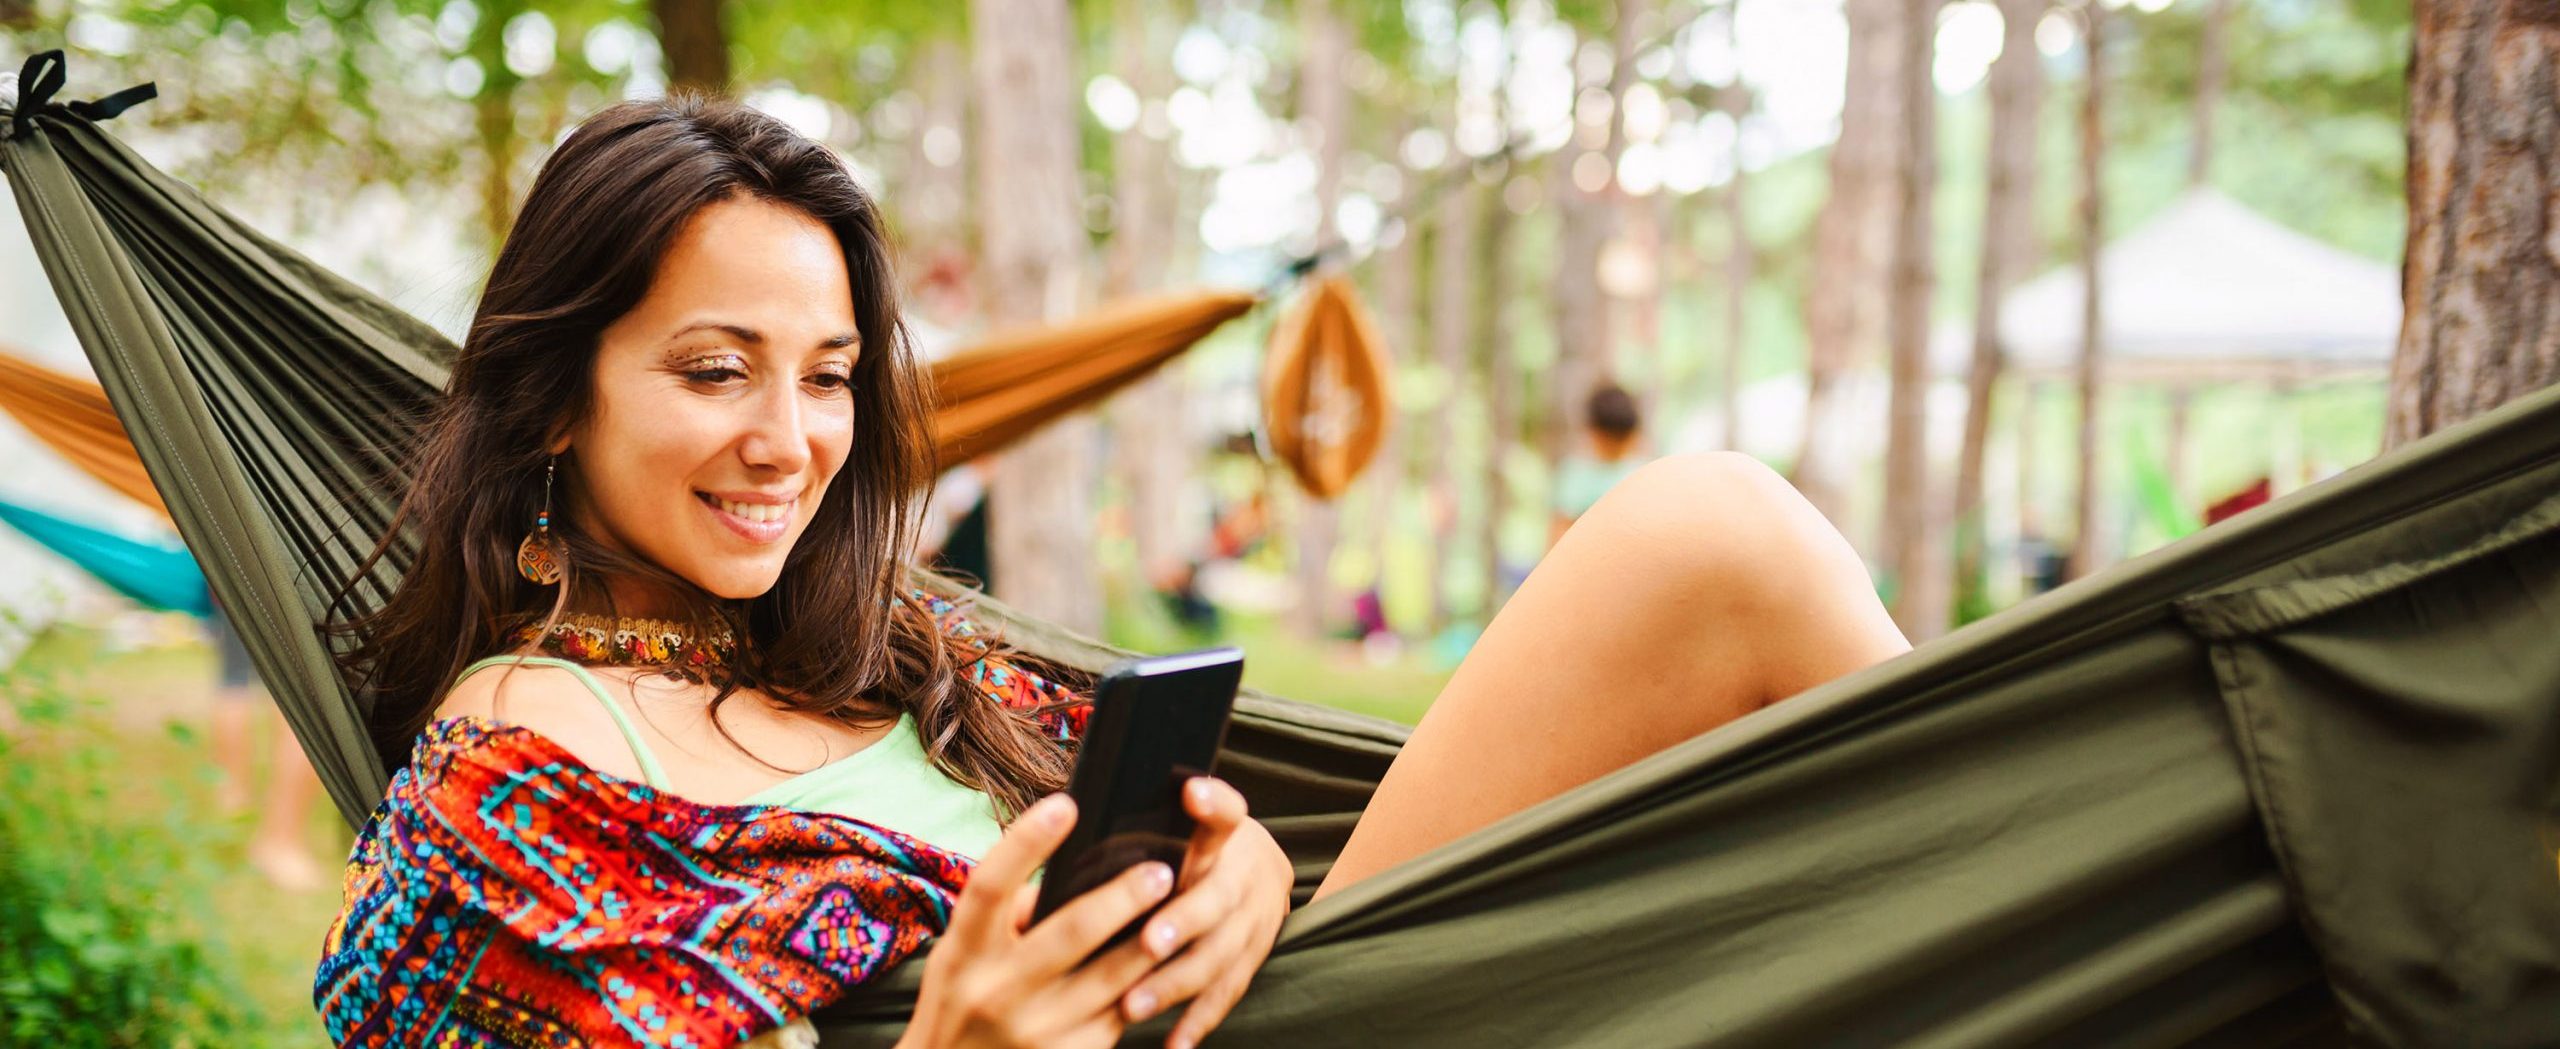 A woman smiles while reclining in a hammock and looking at her mobile phone, with trees in the background.